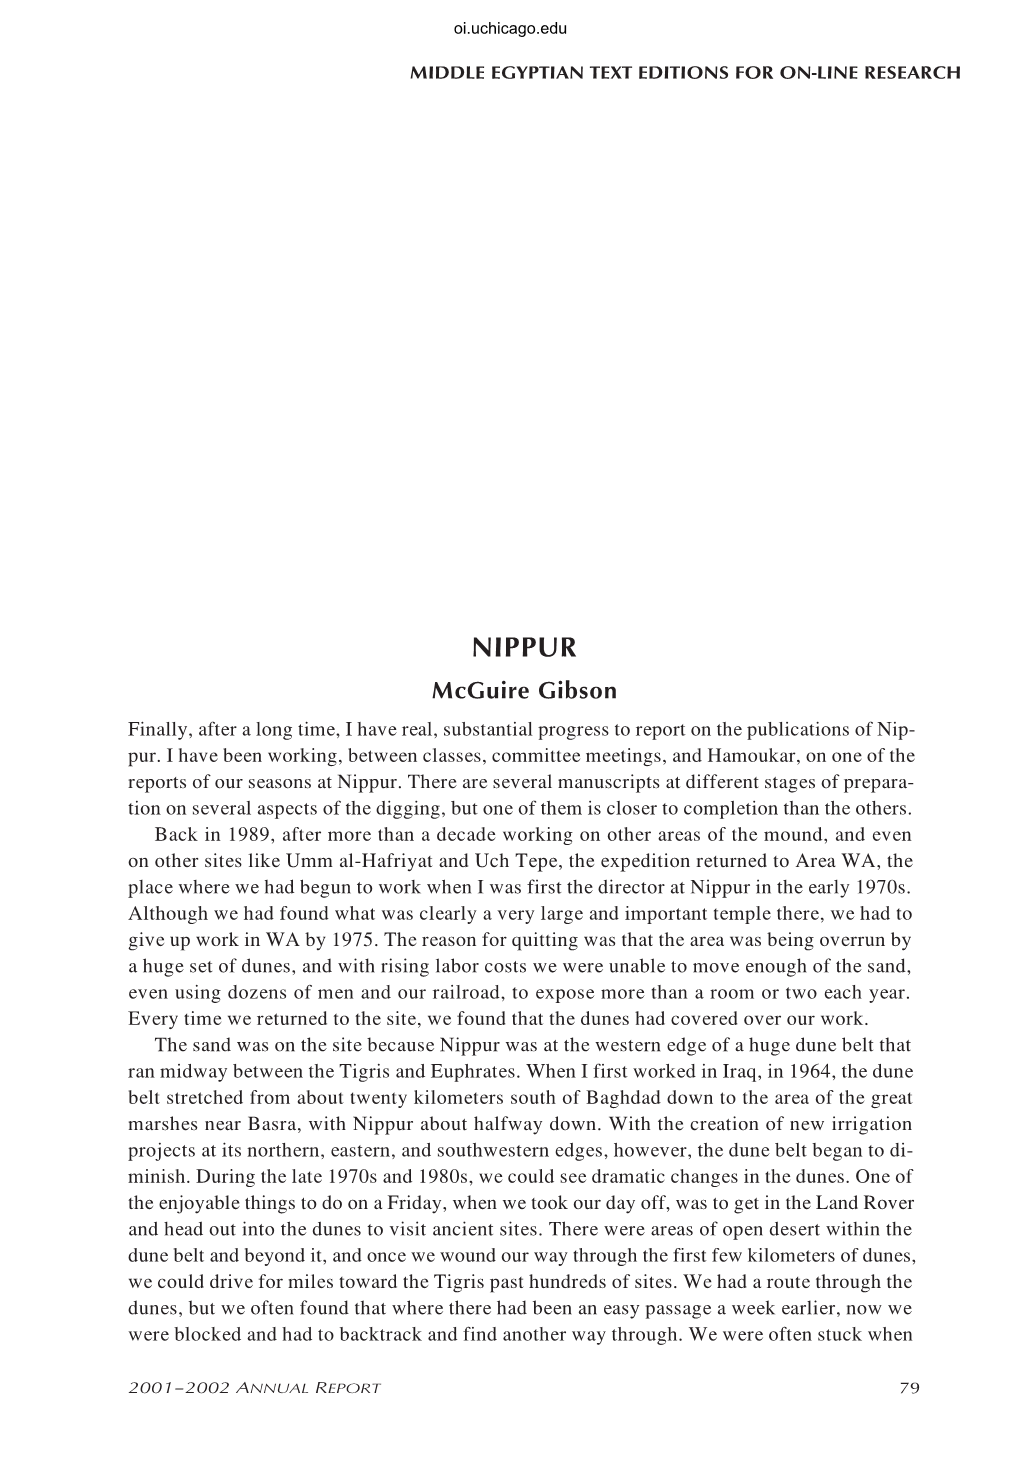 NIPPUR Mcguire Gibson Finally, After a Long Time, I Have Real, Substantial Progress to Report on the Publications of Nip- Pur